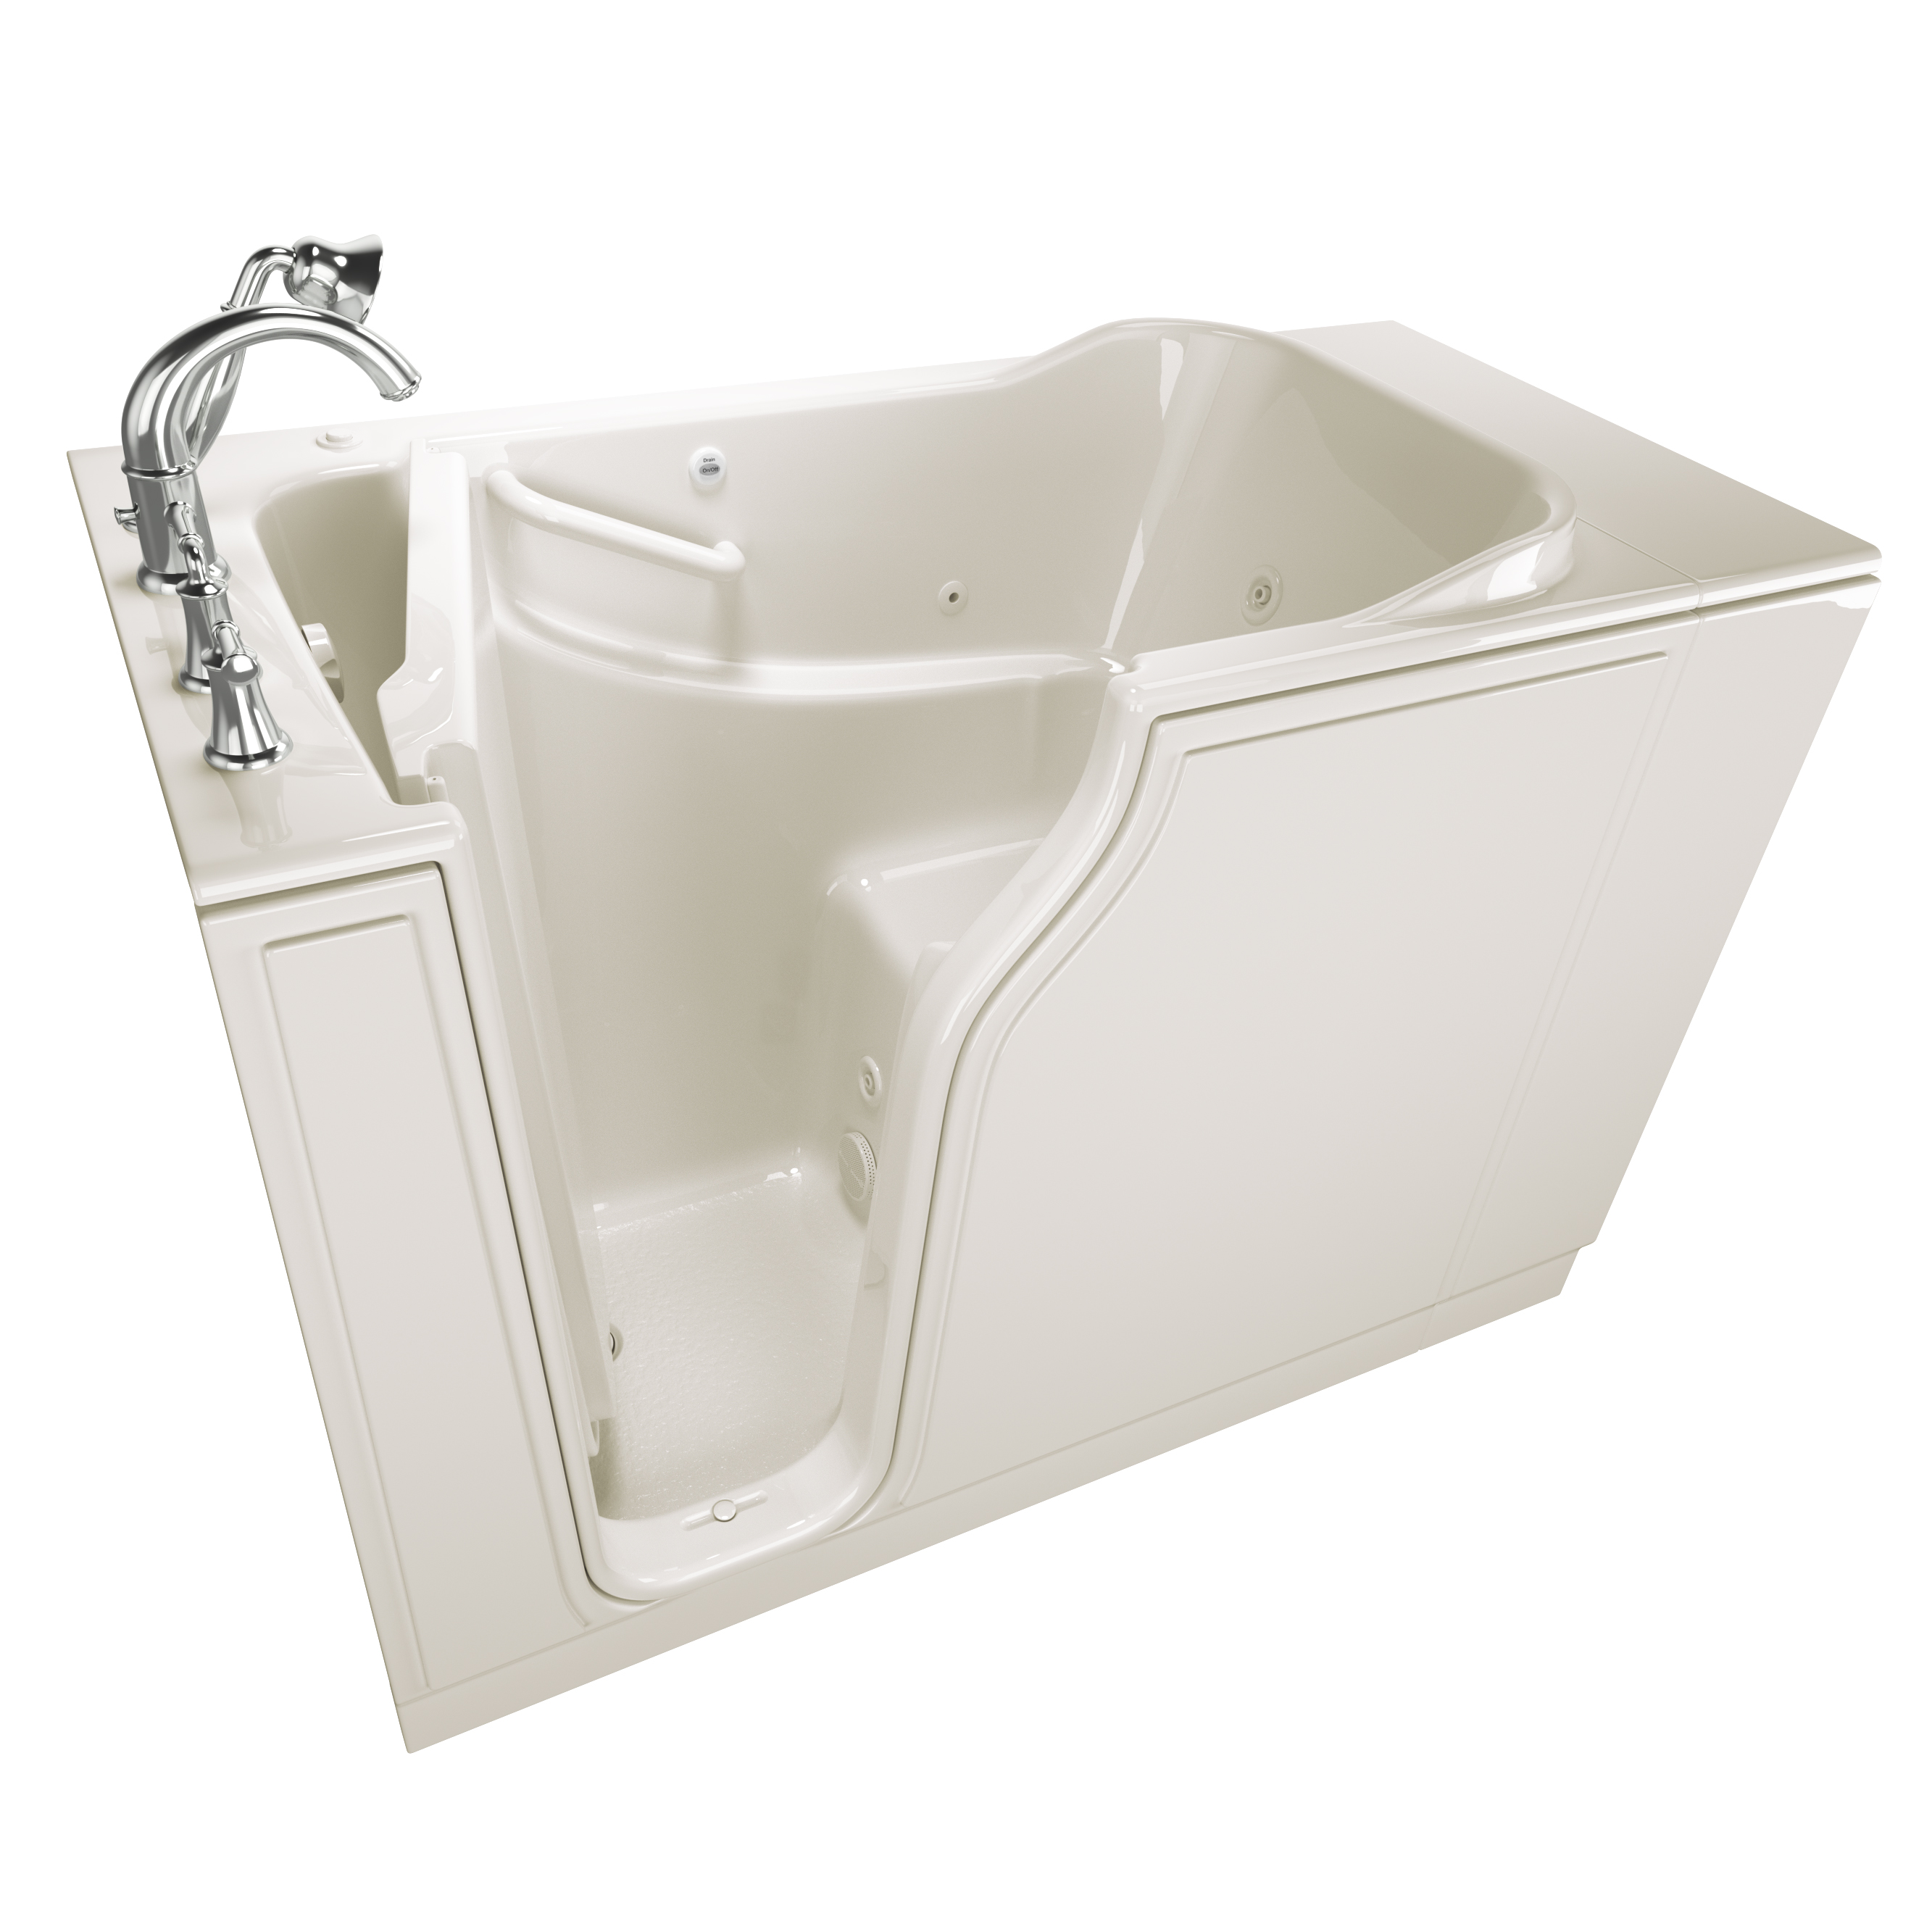 Gelcoat Value Series 30x52 Inch Walk-In Bathtub with Whirlpool Massage System - Left Hand Door and Drain